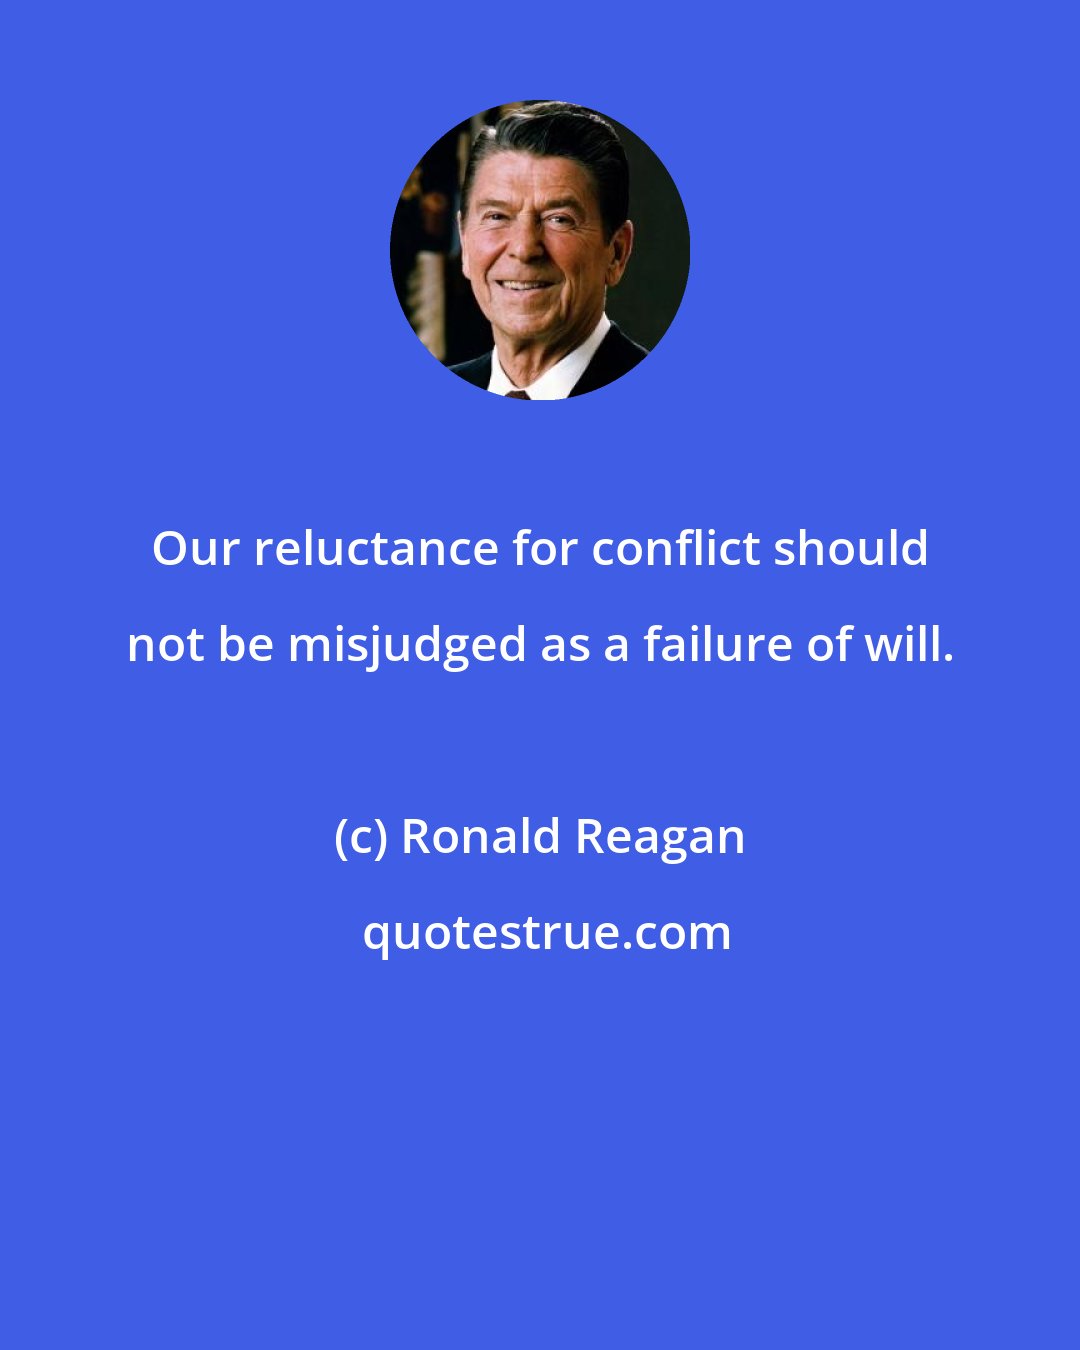 Ronald Reagan: Our reluctance for conflict should not be misjudged as a failure of will.